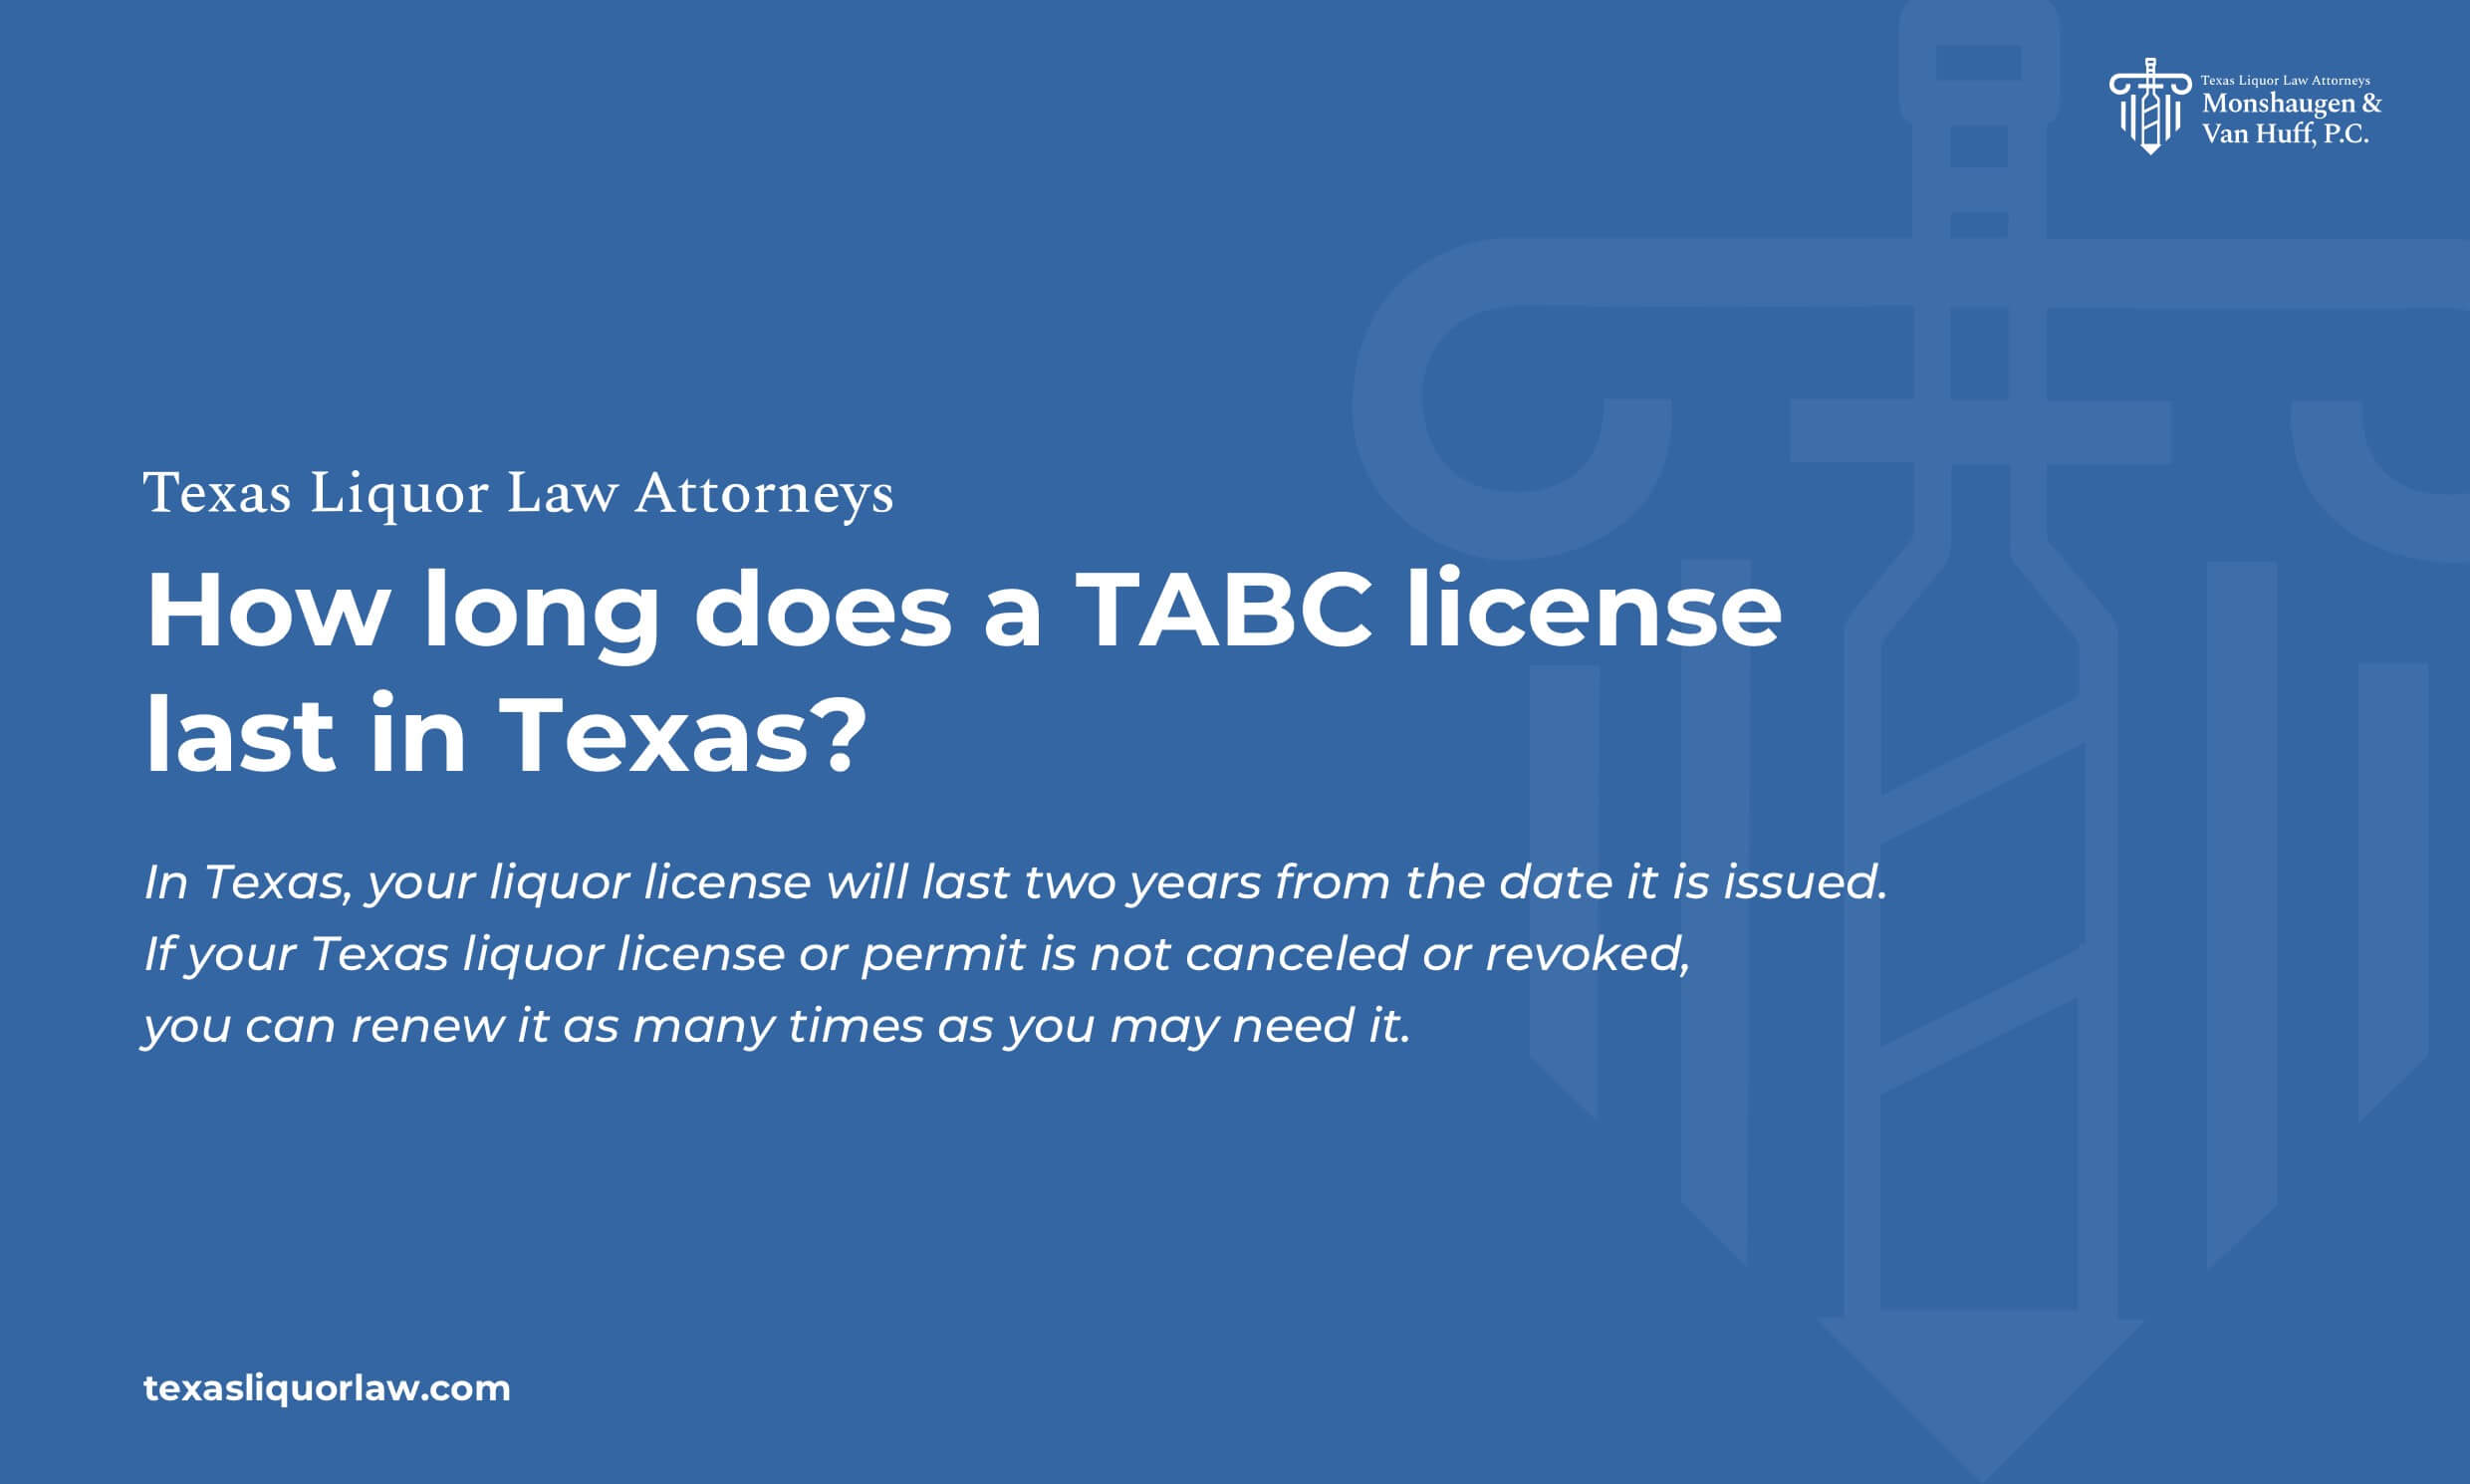 How long does a TABC license last in Texas